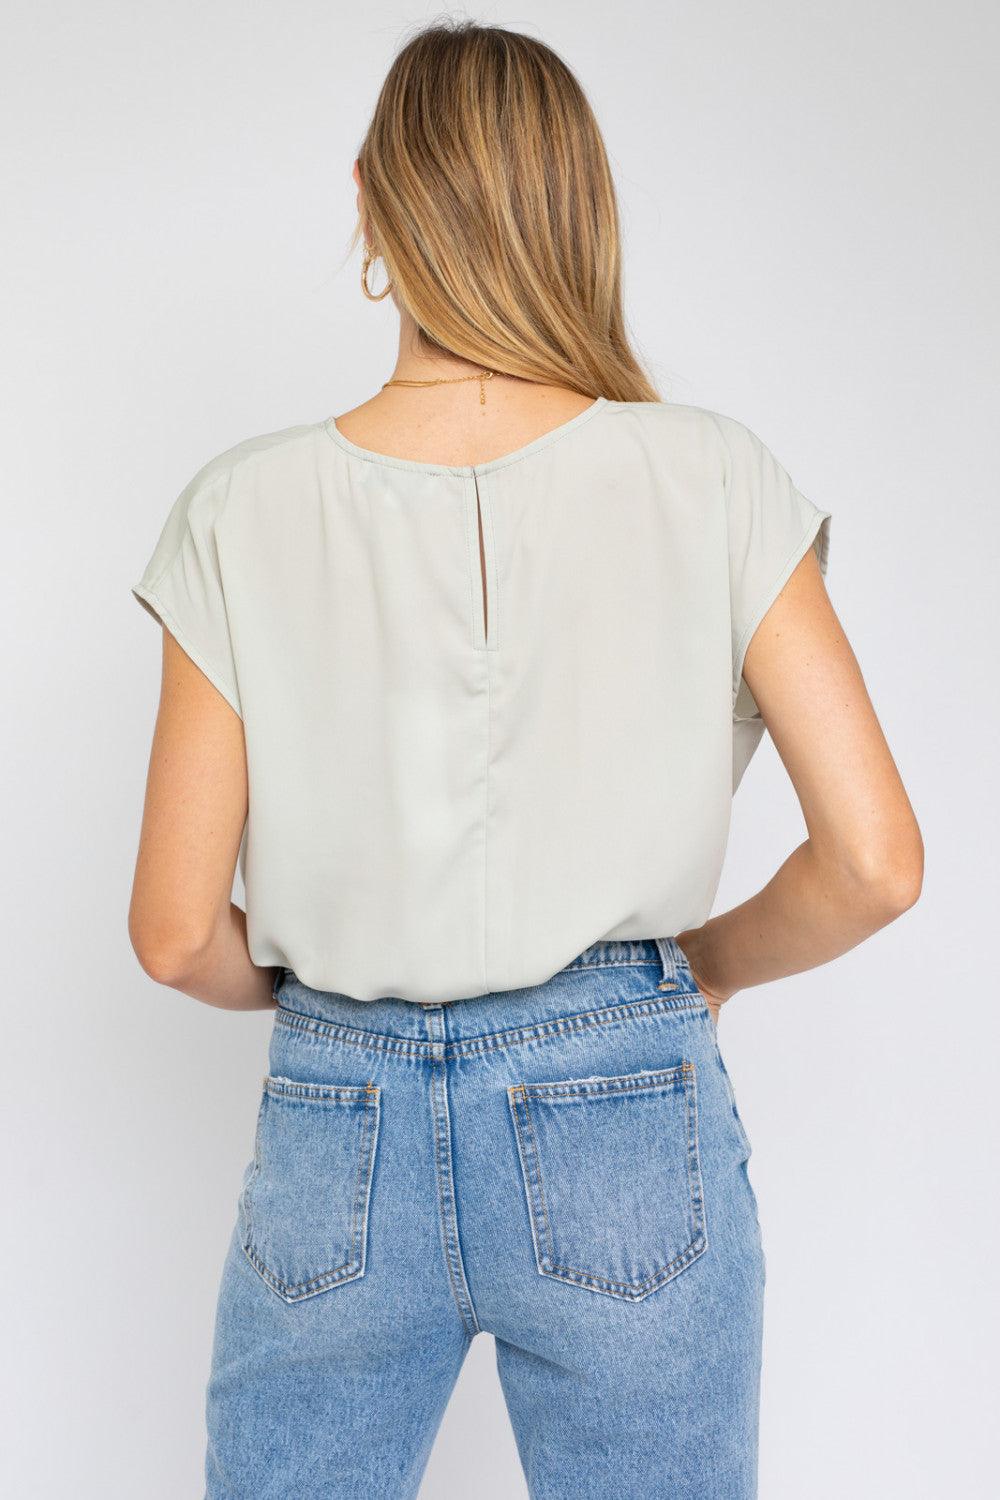 Sage Pleated Bodysuit - Strawberry Moon Boutique